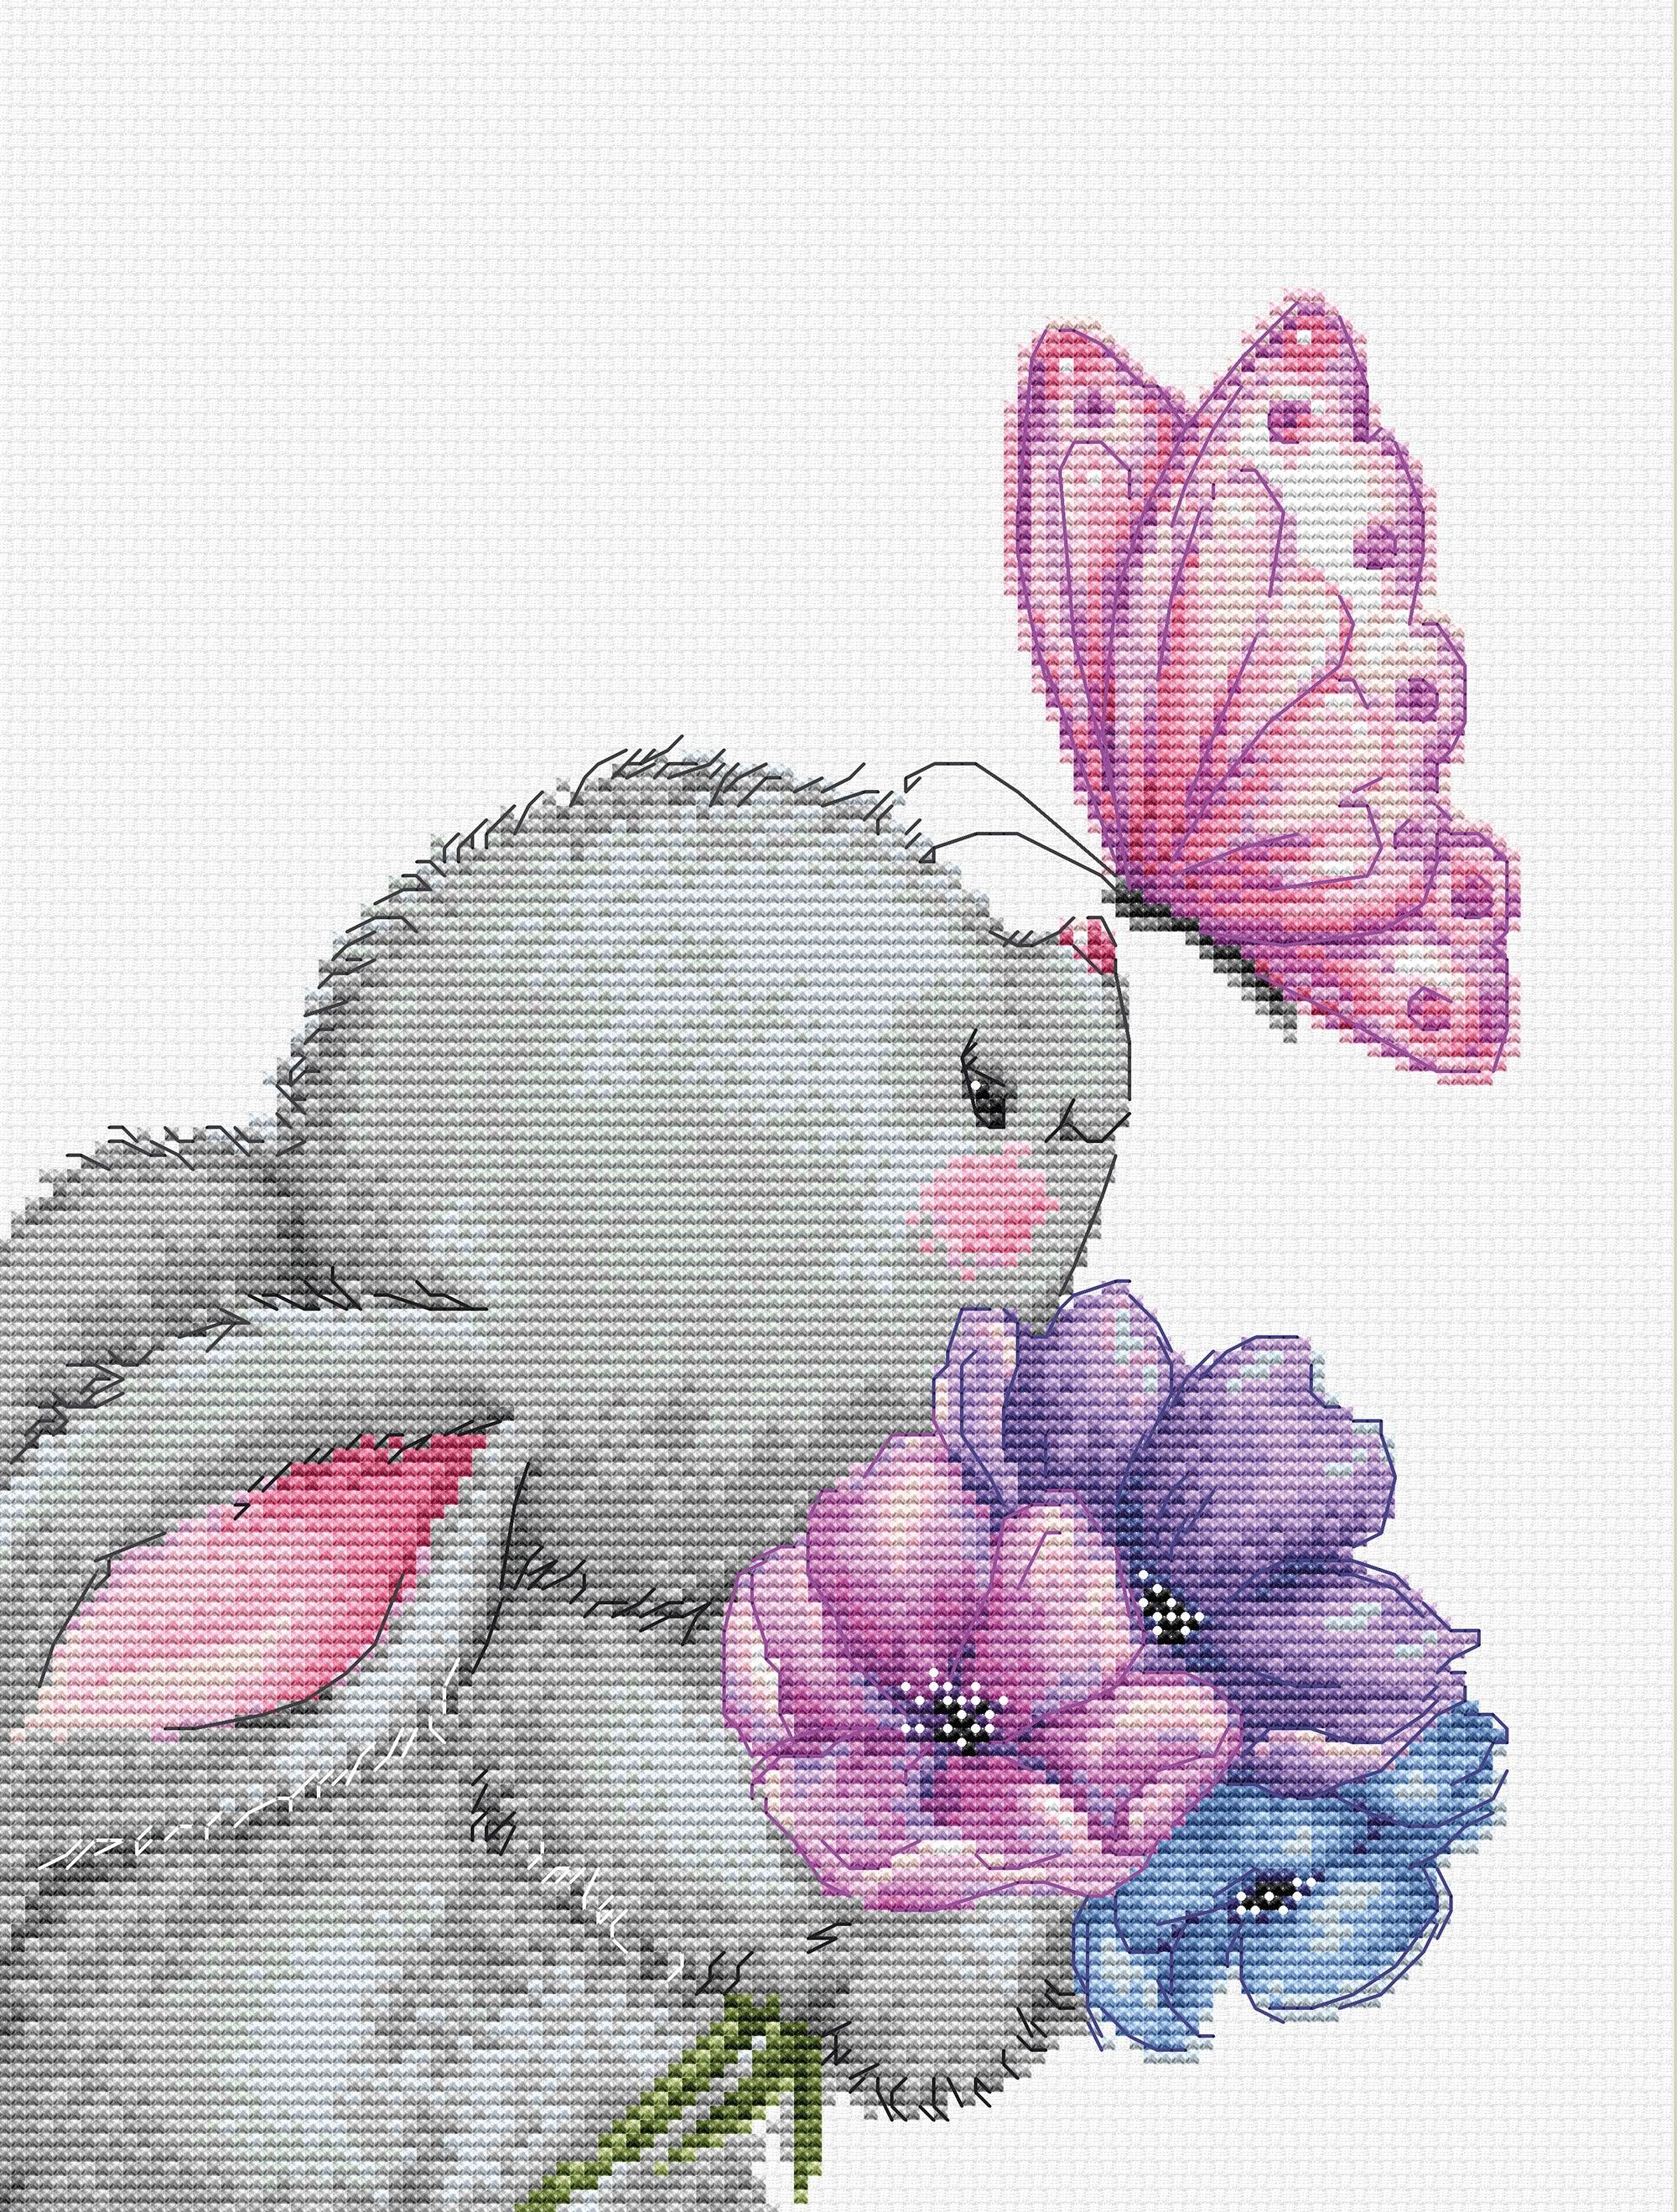 Cross Stitch Kit Luca-S - Rabbit and Butterfly, B1235 - Luca-S Cross Stitch Kits